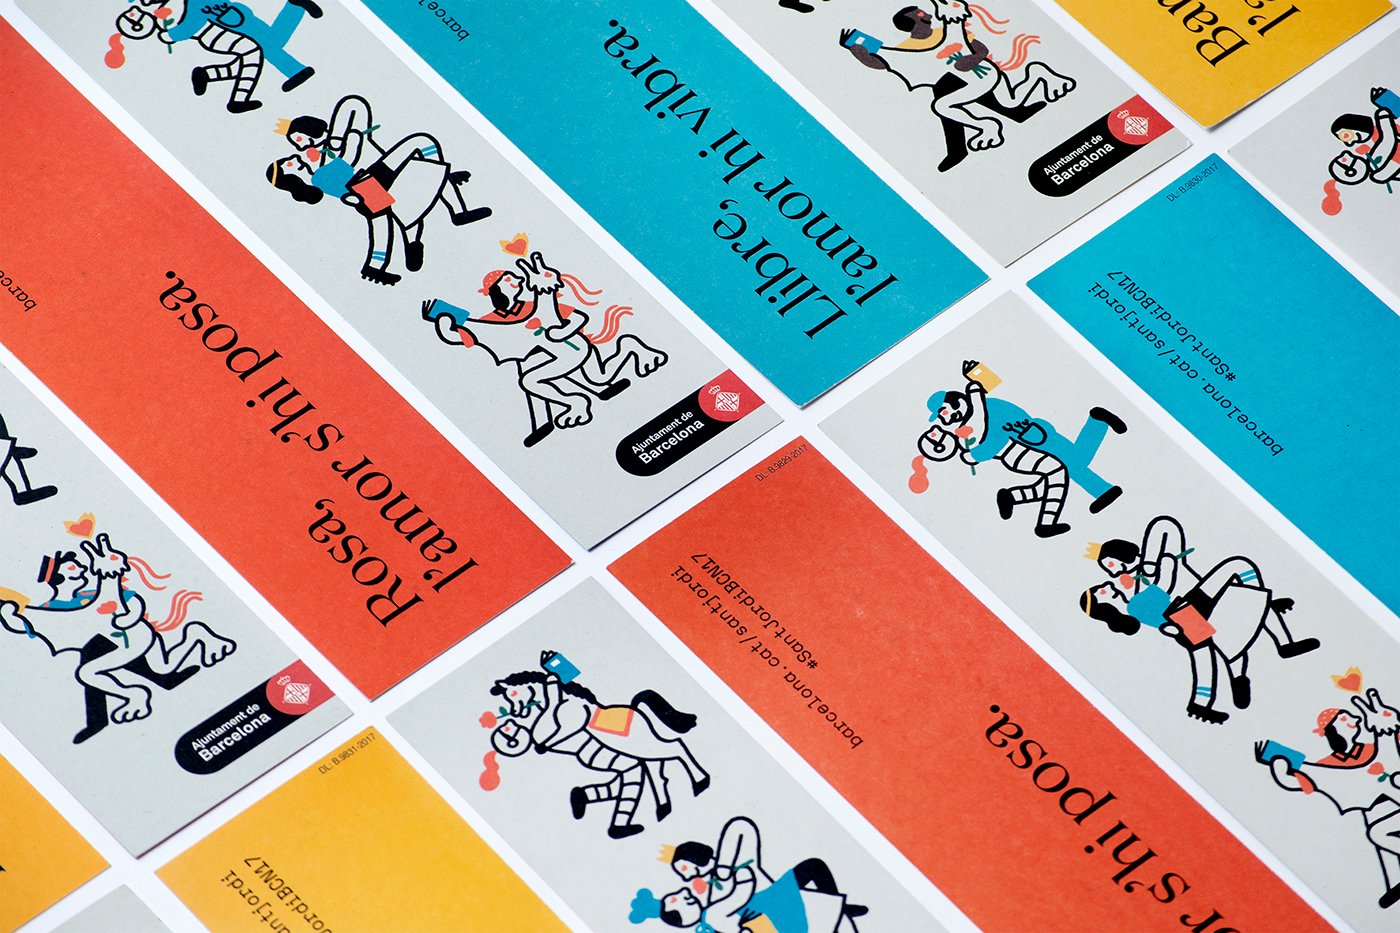 Visual identity and bookmarks designed by Requena featuring illustration by Olga Capdevila for Sant Jordi Festival 2017